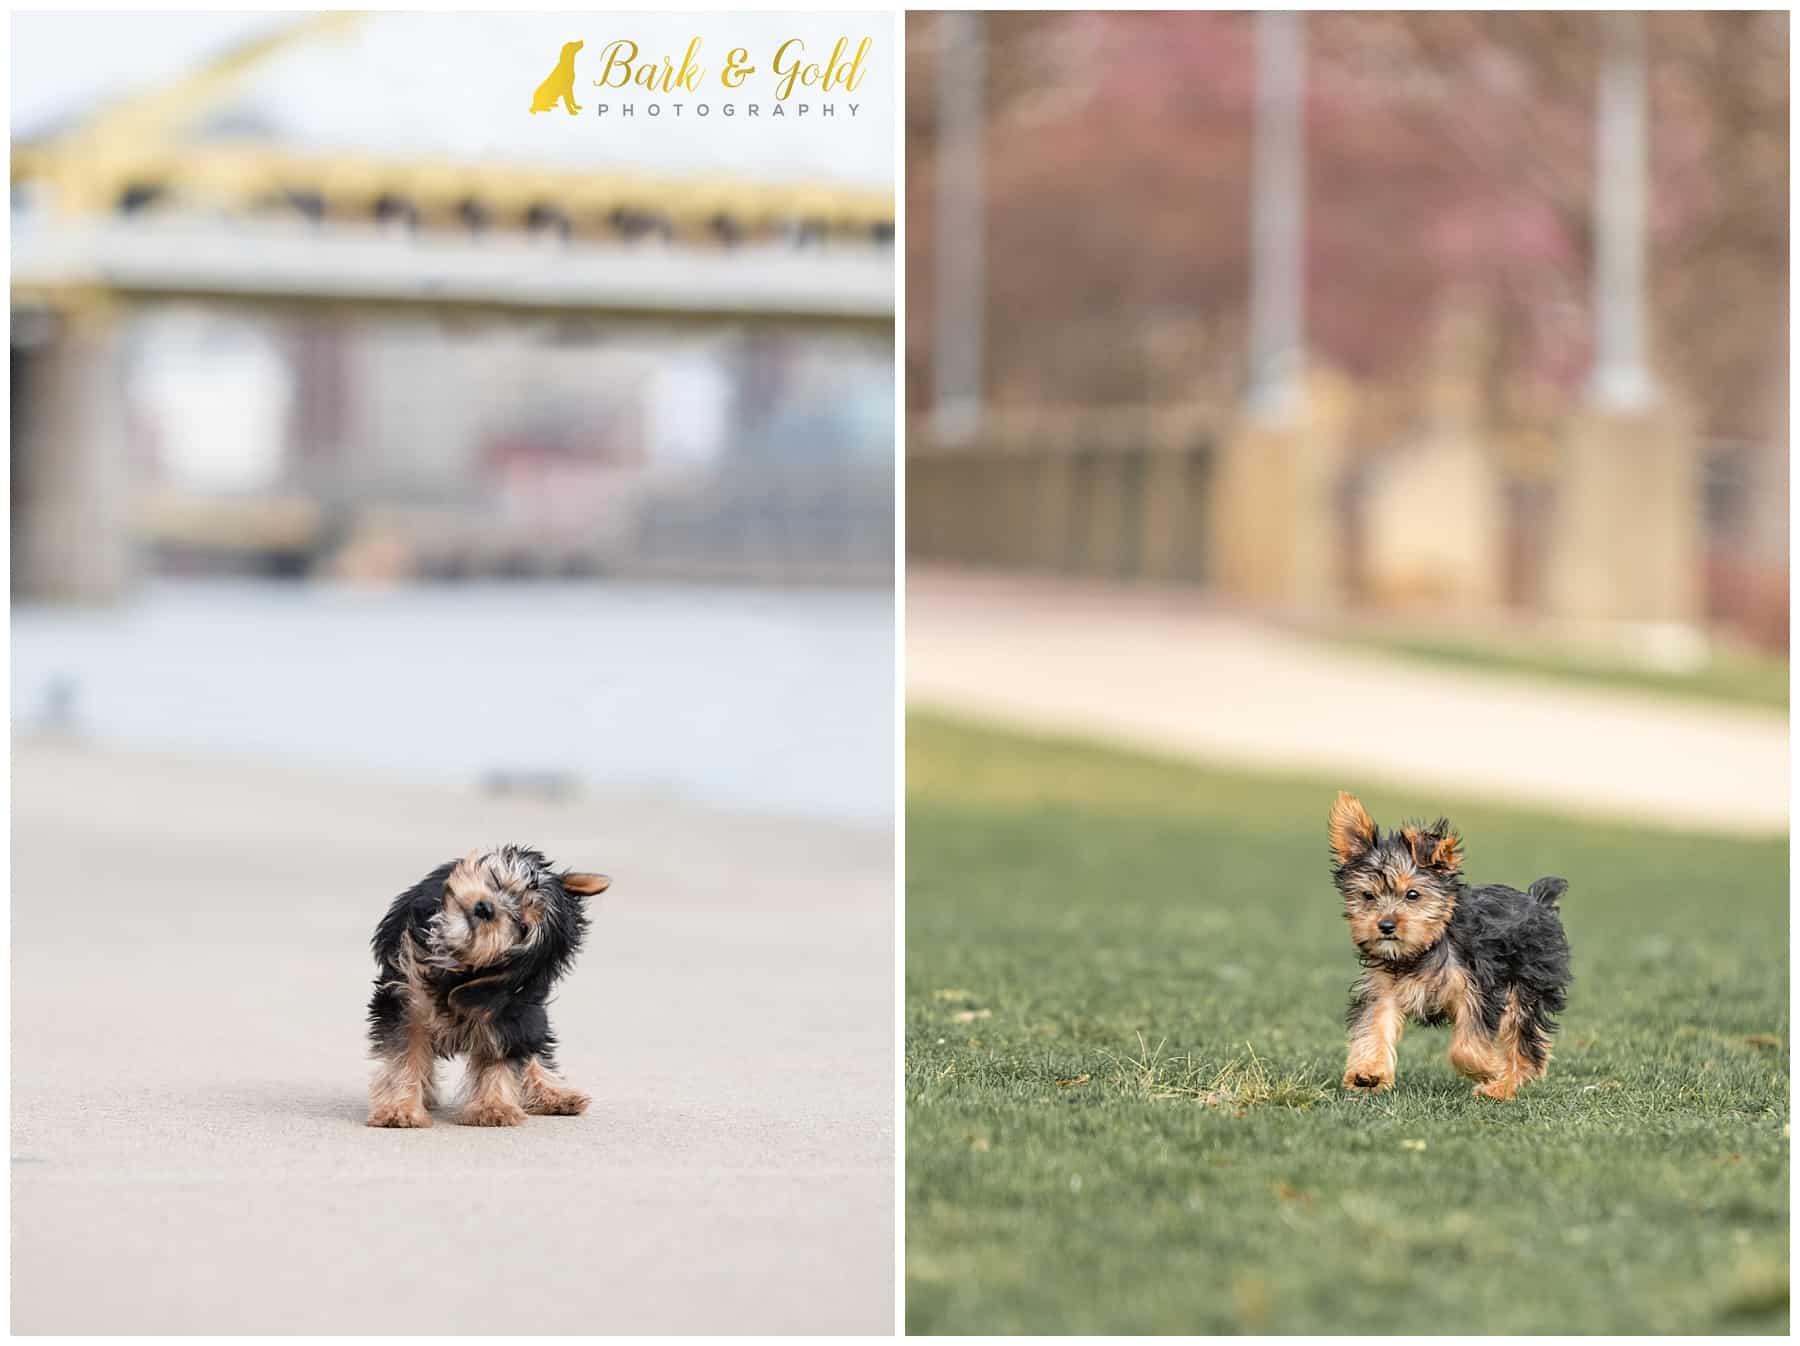 Tiny 13-week-old Yorkshire terrier shakes and plays along the Three Rivers Heritage Trail on Pittsburgh's North Shore during a spring pet photography session